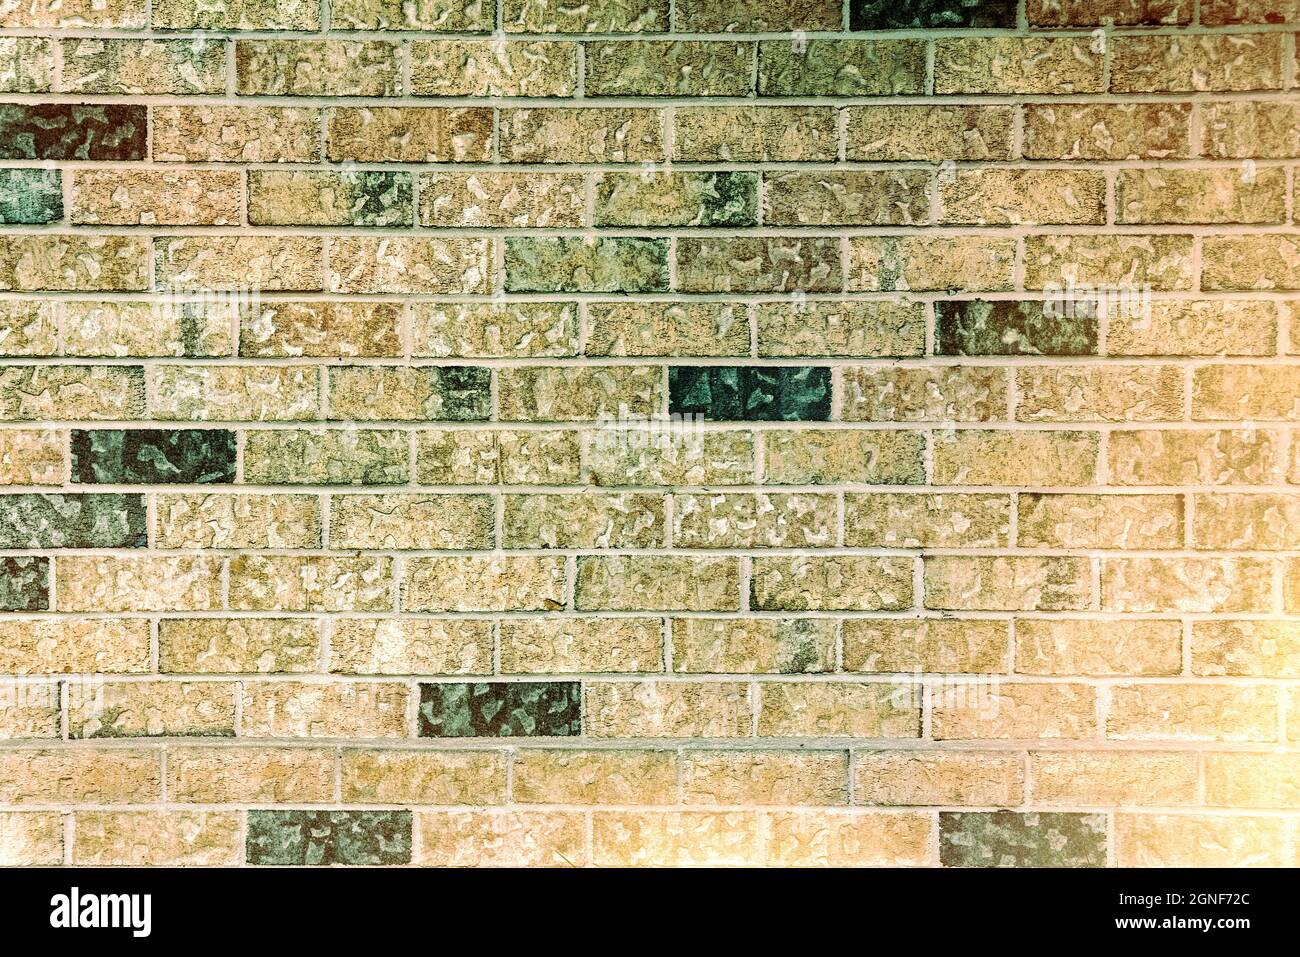 Abstract background of old brick wall Stock Photo